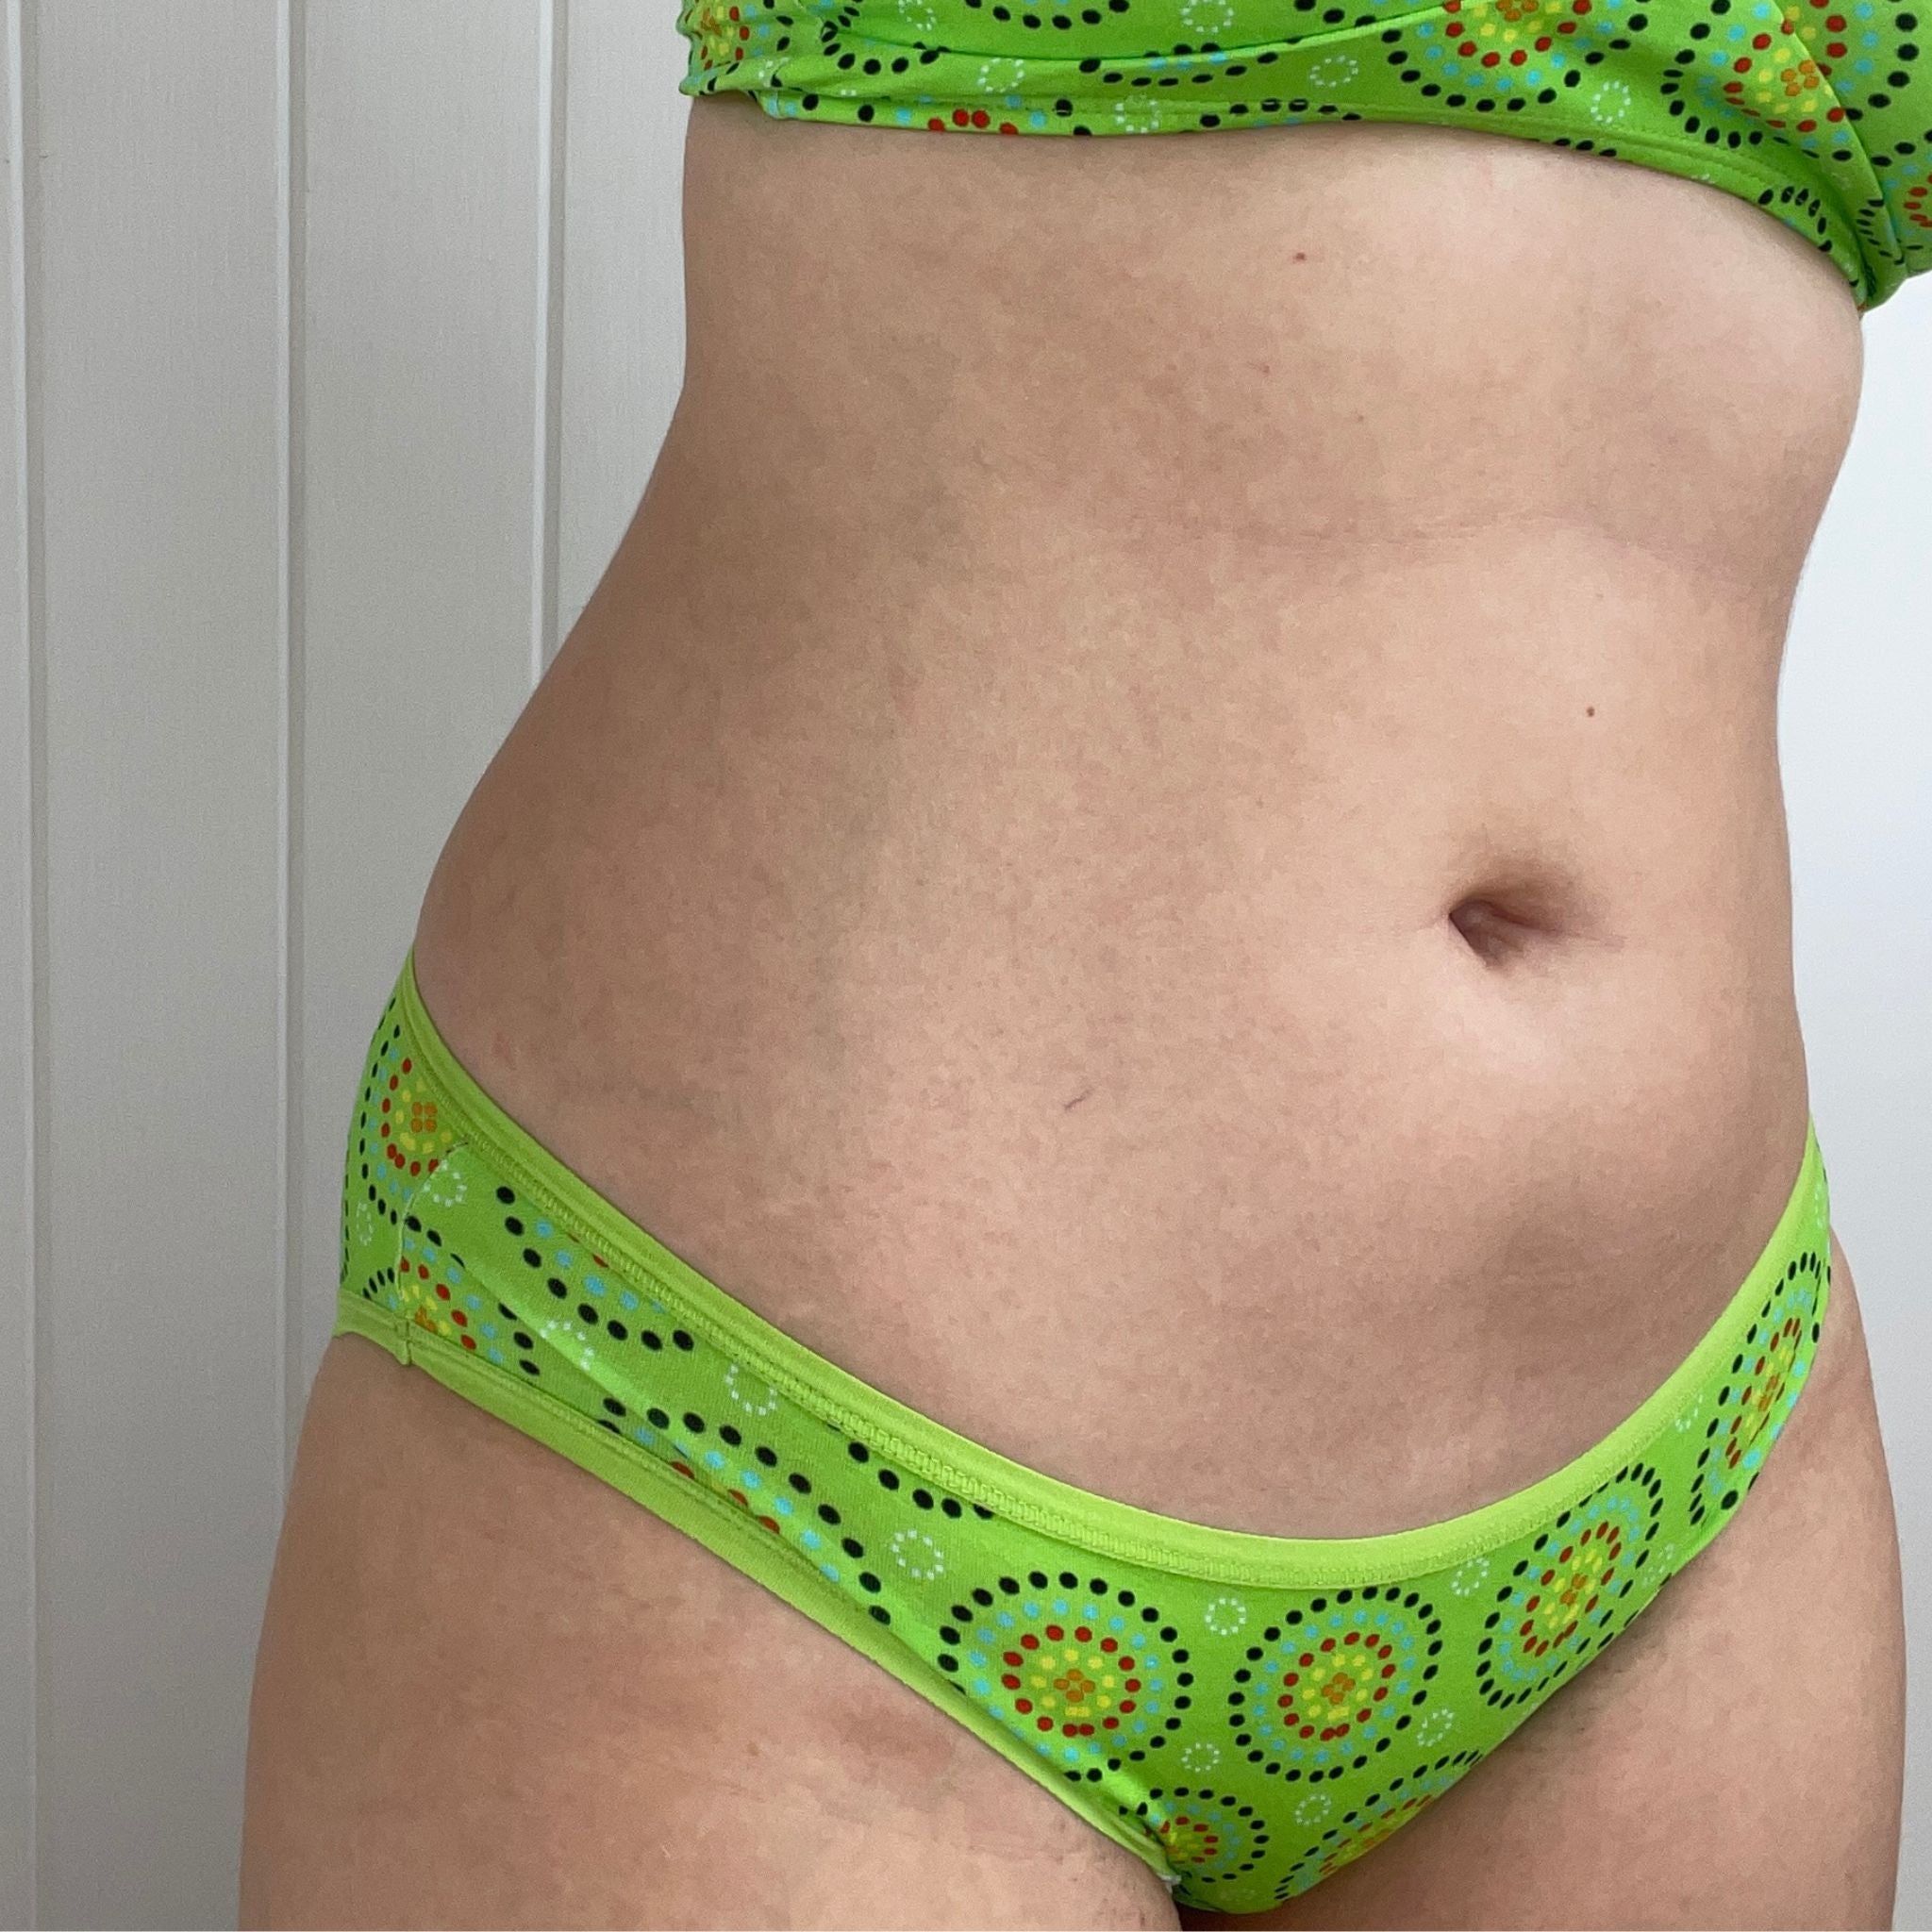 Person wearing green bikini bottoms and bralette with circular patterns, standing indoors